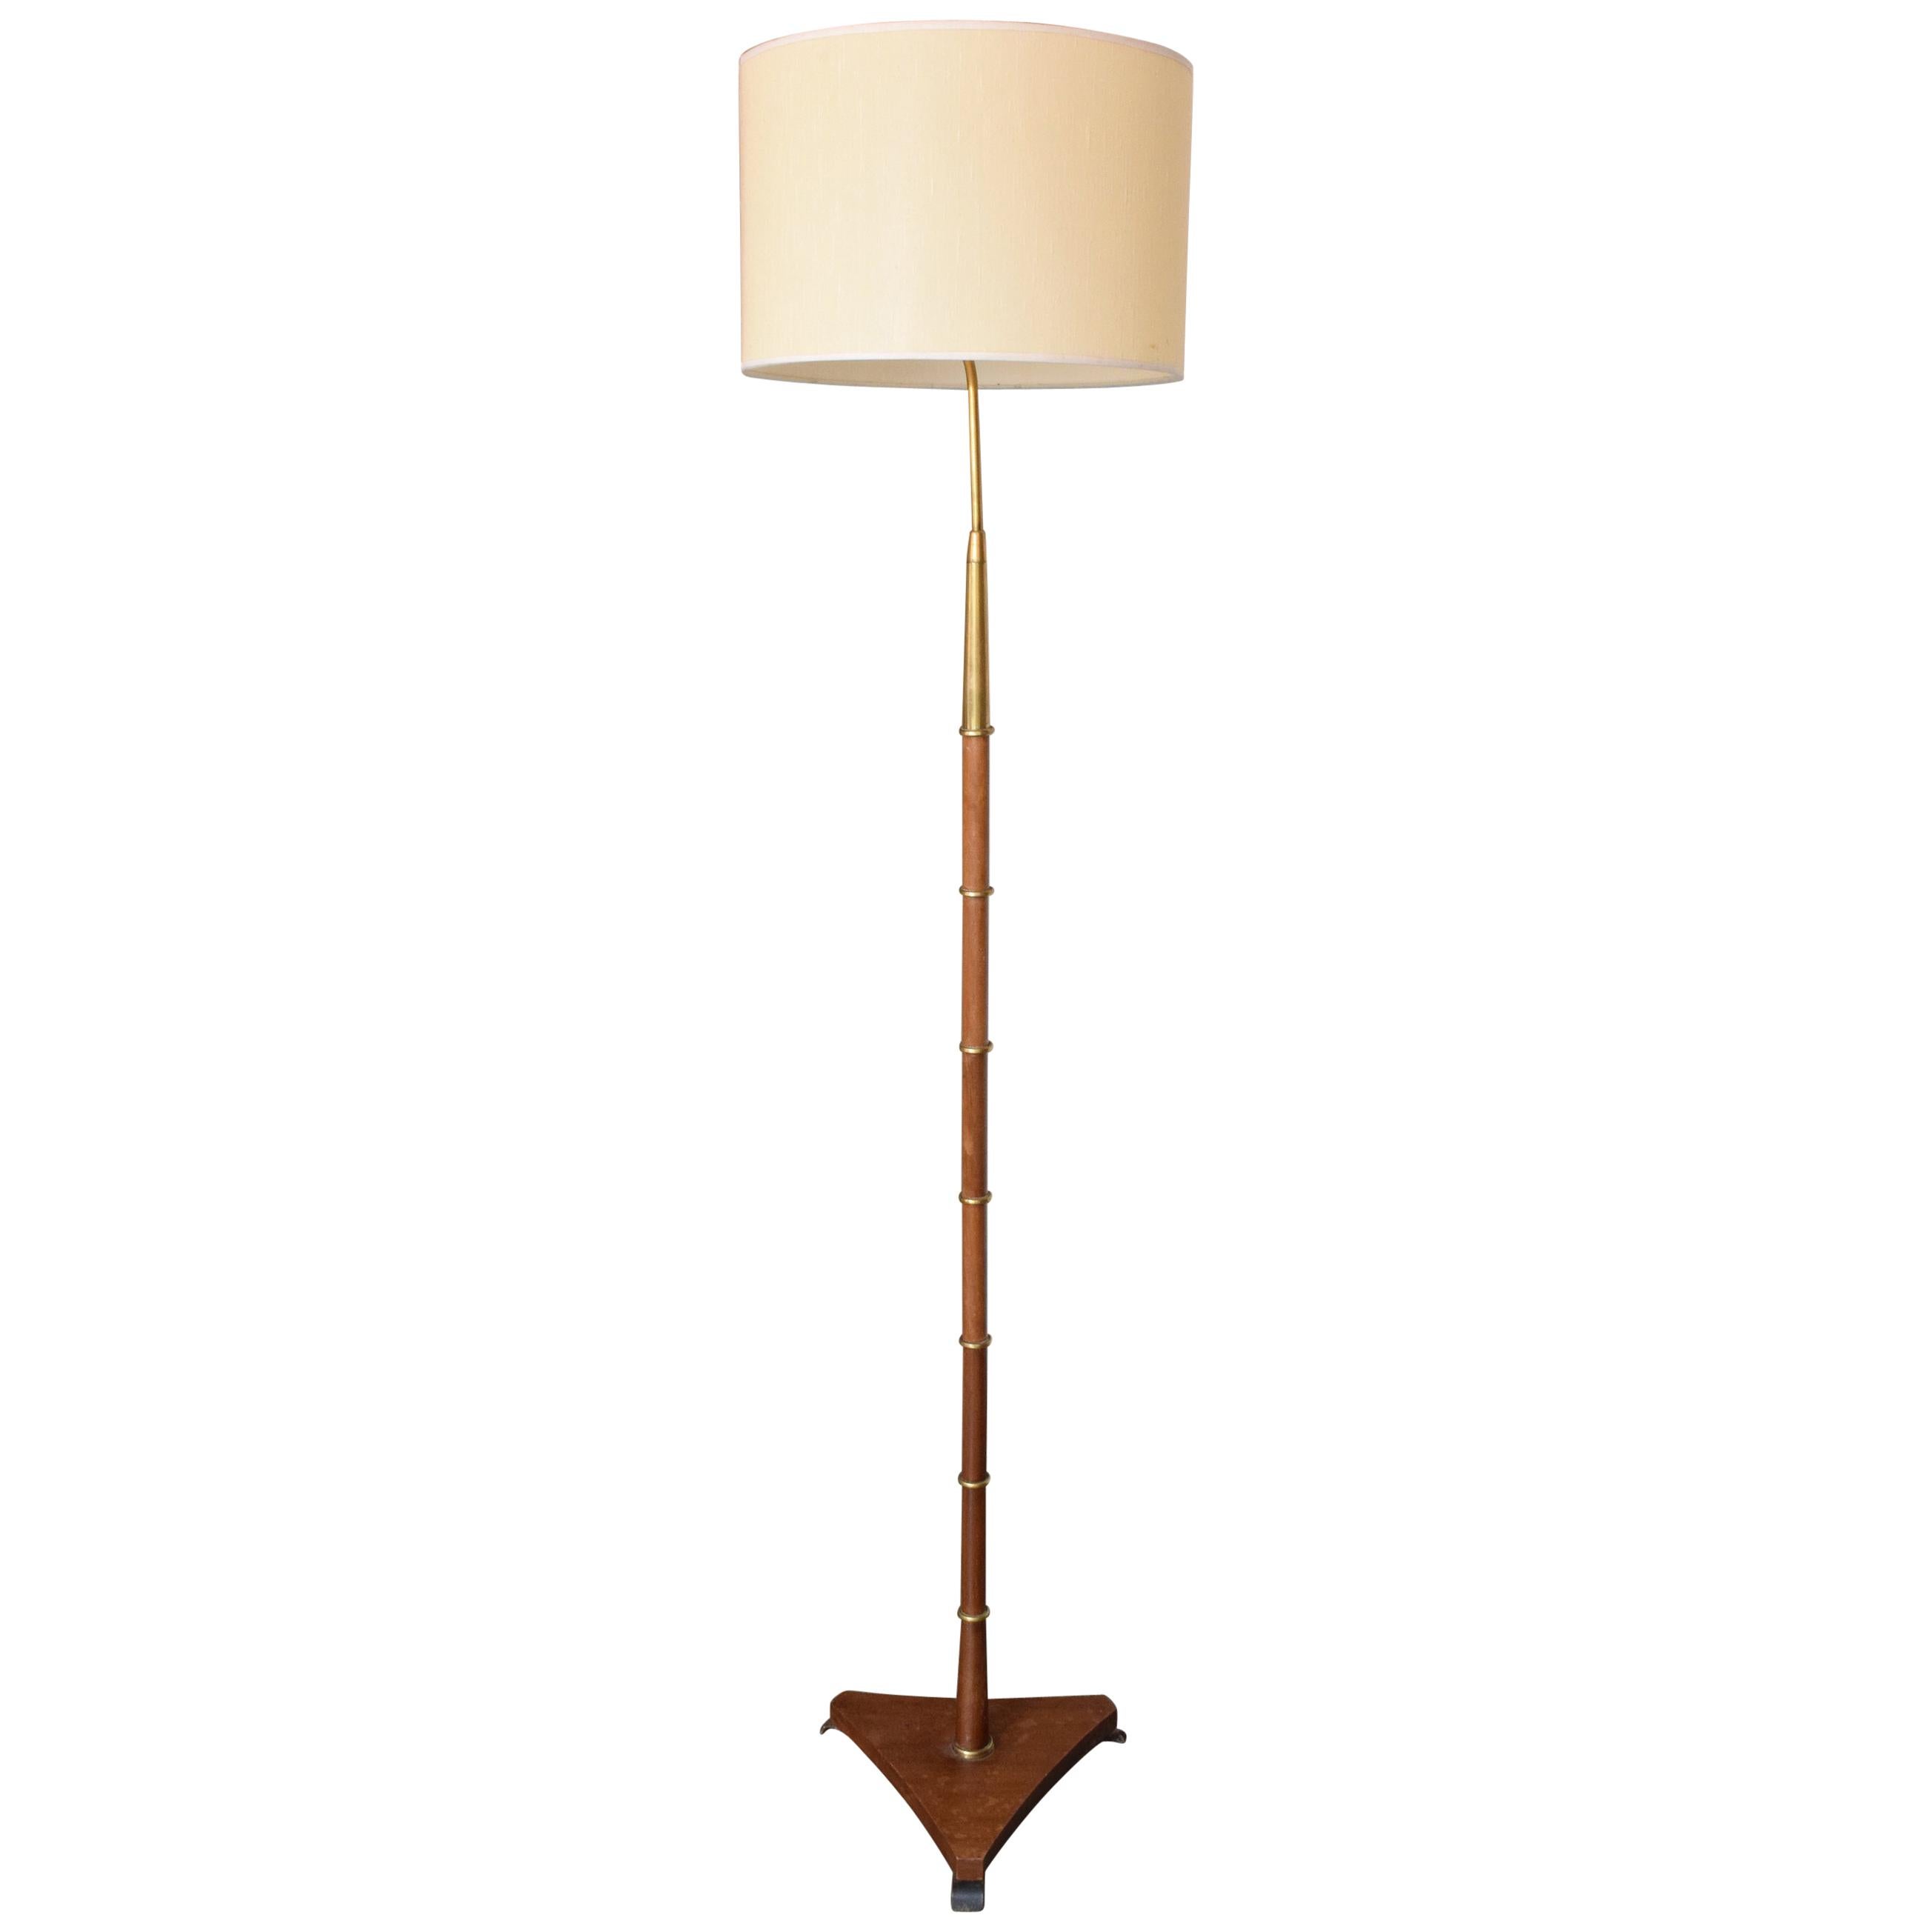 20th Century French Floor Lamp by Maison Lunel, 1950s